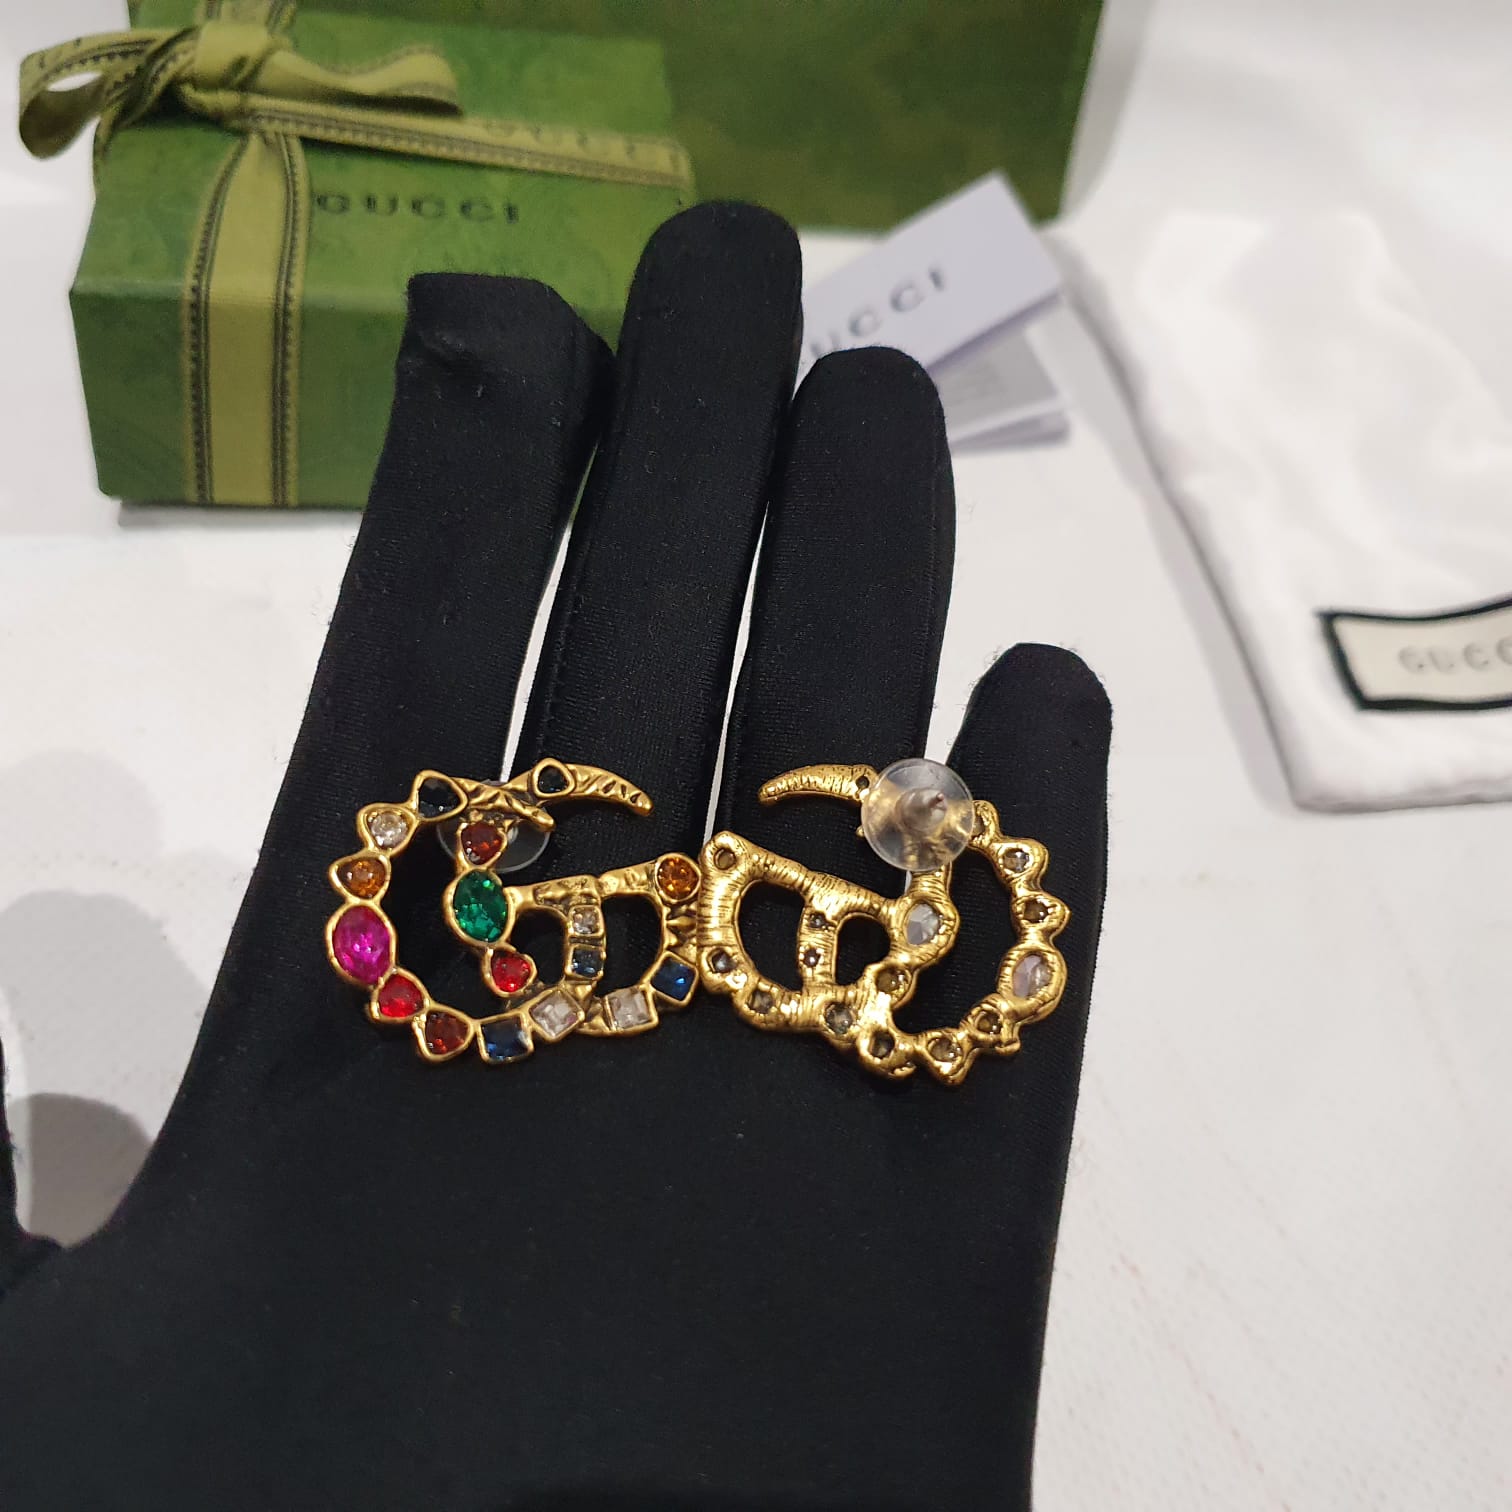 Gucci Brooch and Earrings